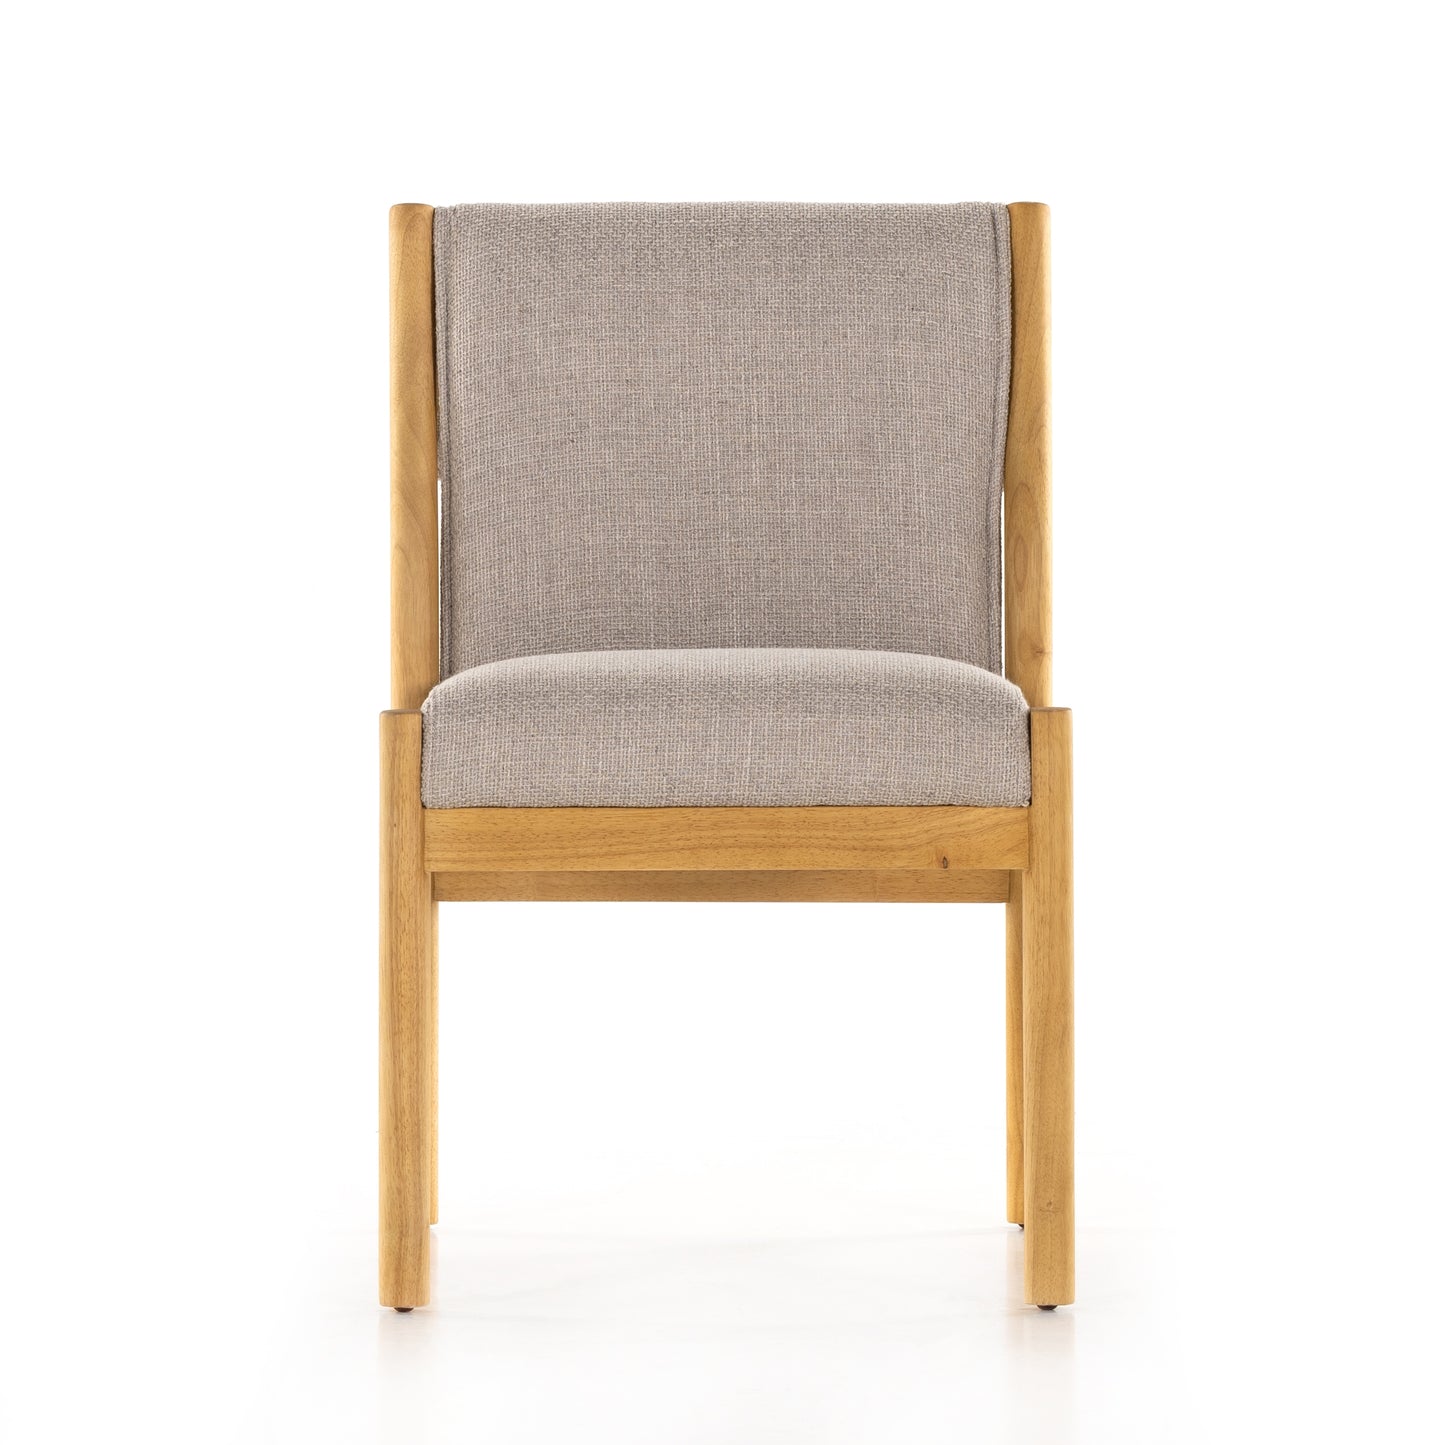 Hito Dining Chair Dining Chair Four Hands     Four Hands, Burke Decor, Mid Century Modern Furniture, Old Bones Furniture Company, Old Bones Co, Modern Mid Century, Designer Furniture, https://www.oldbonesco.com/